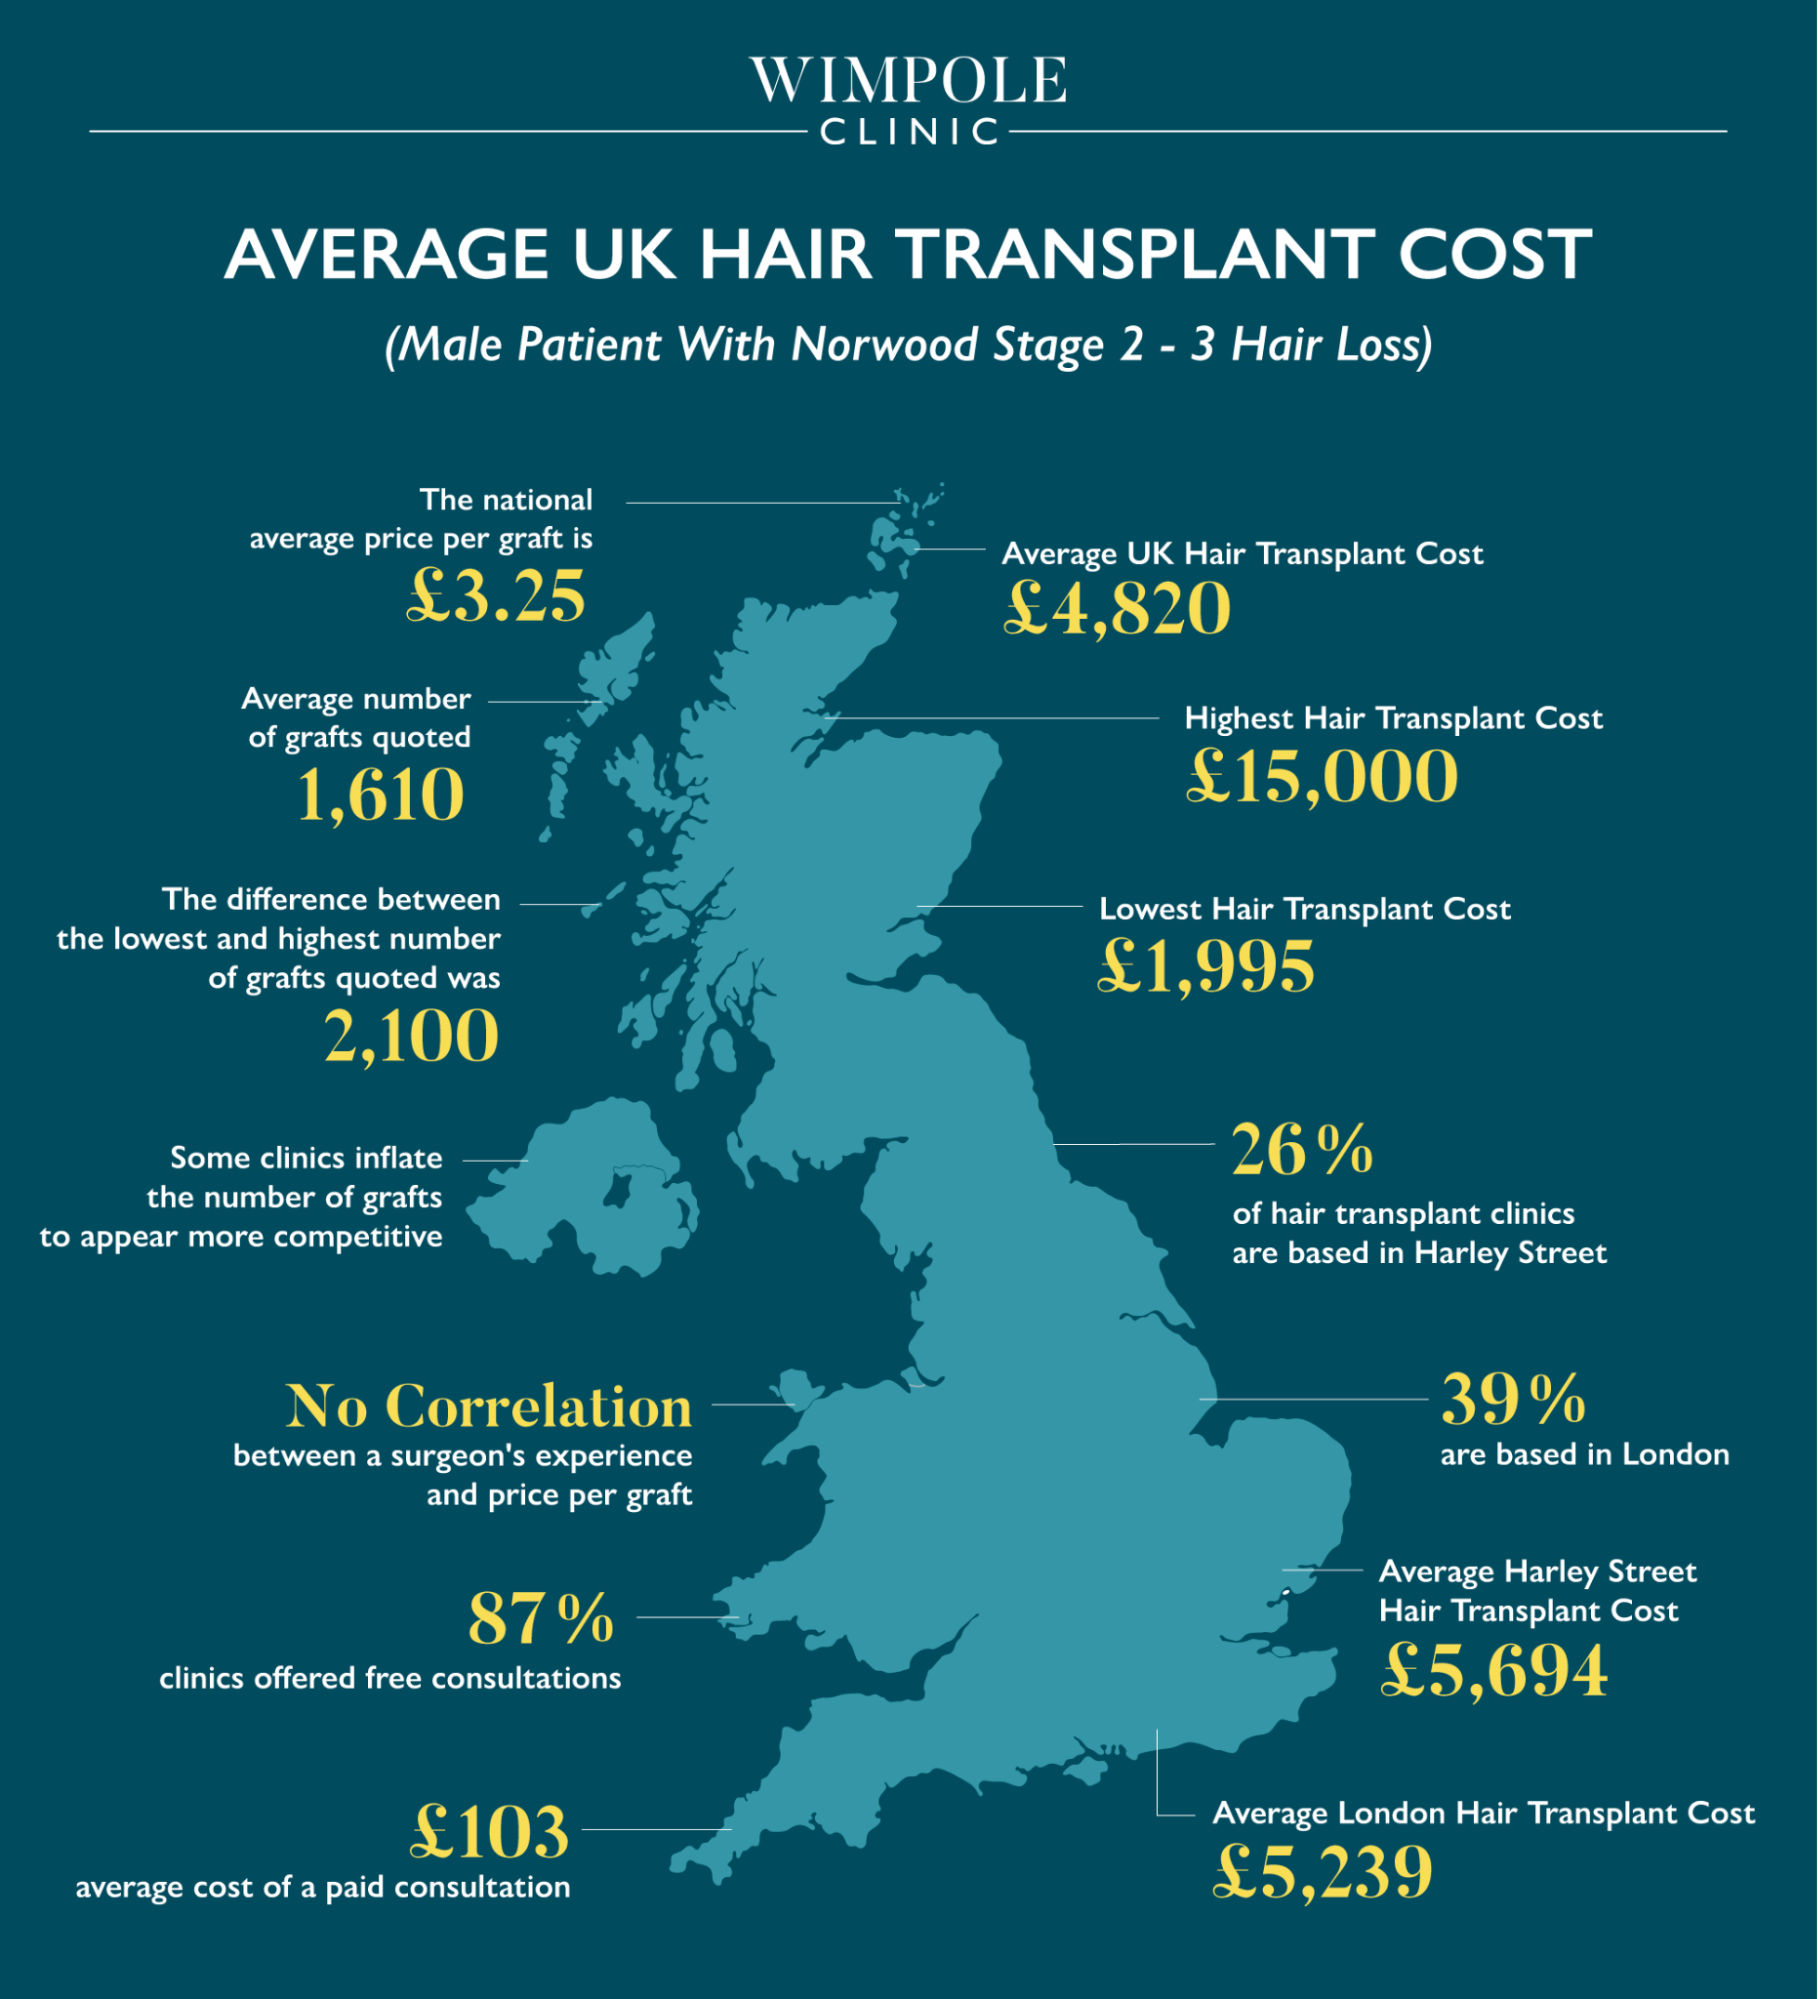 Cheap Hair Transplants: Why Cheaper Isn’t Always Better, Wimpole Clinic